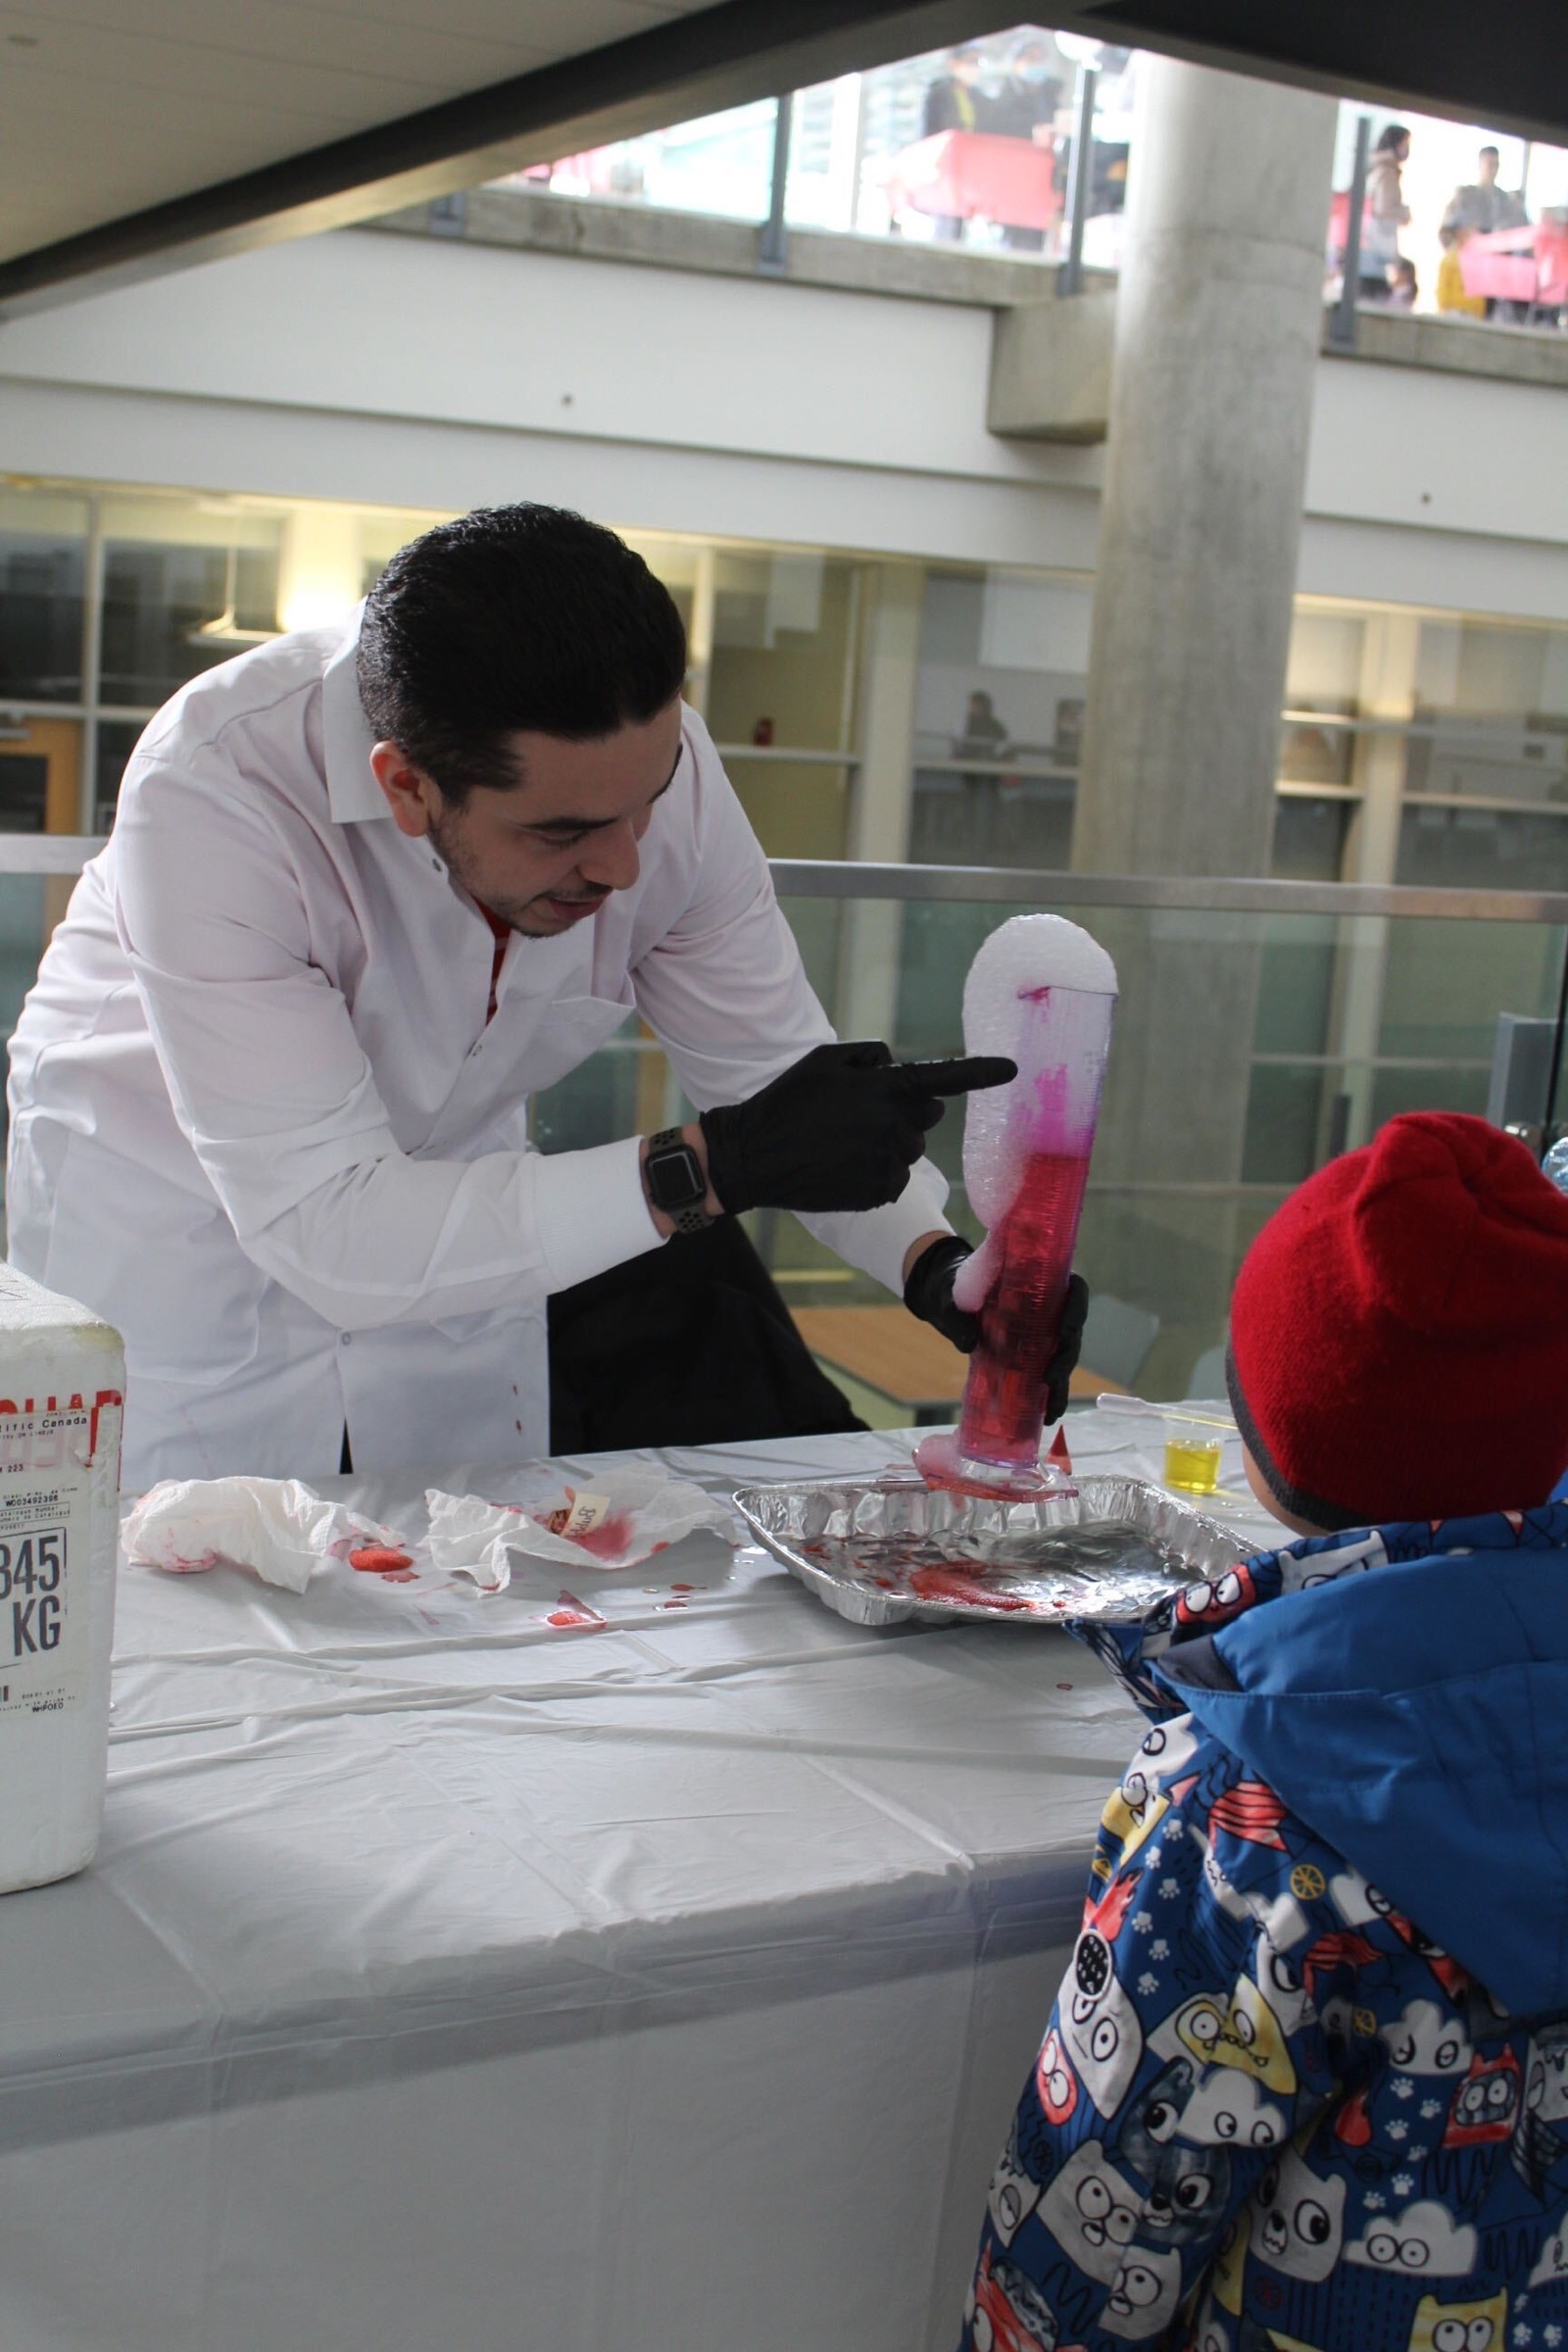 A FUNday volunteer demonstrates bubbles forming from dry ice to an attentive crowd of children.